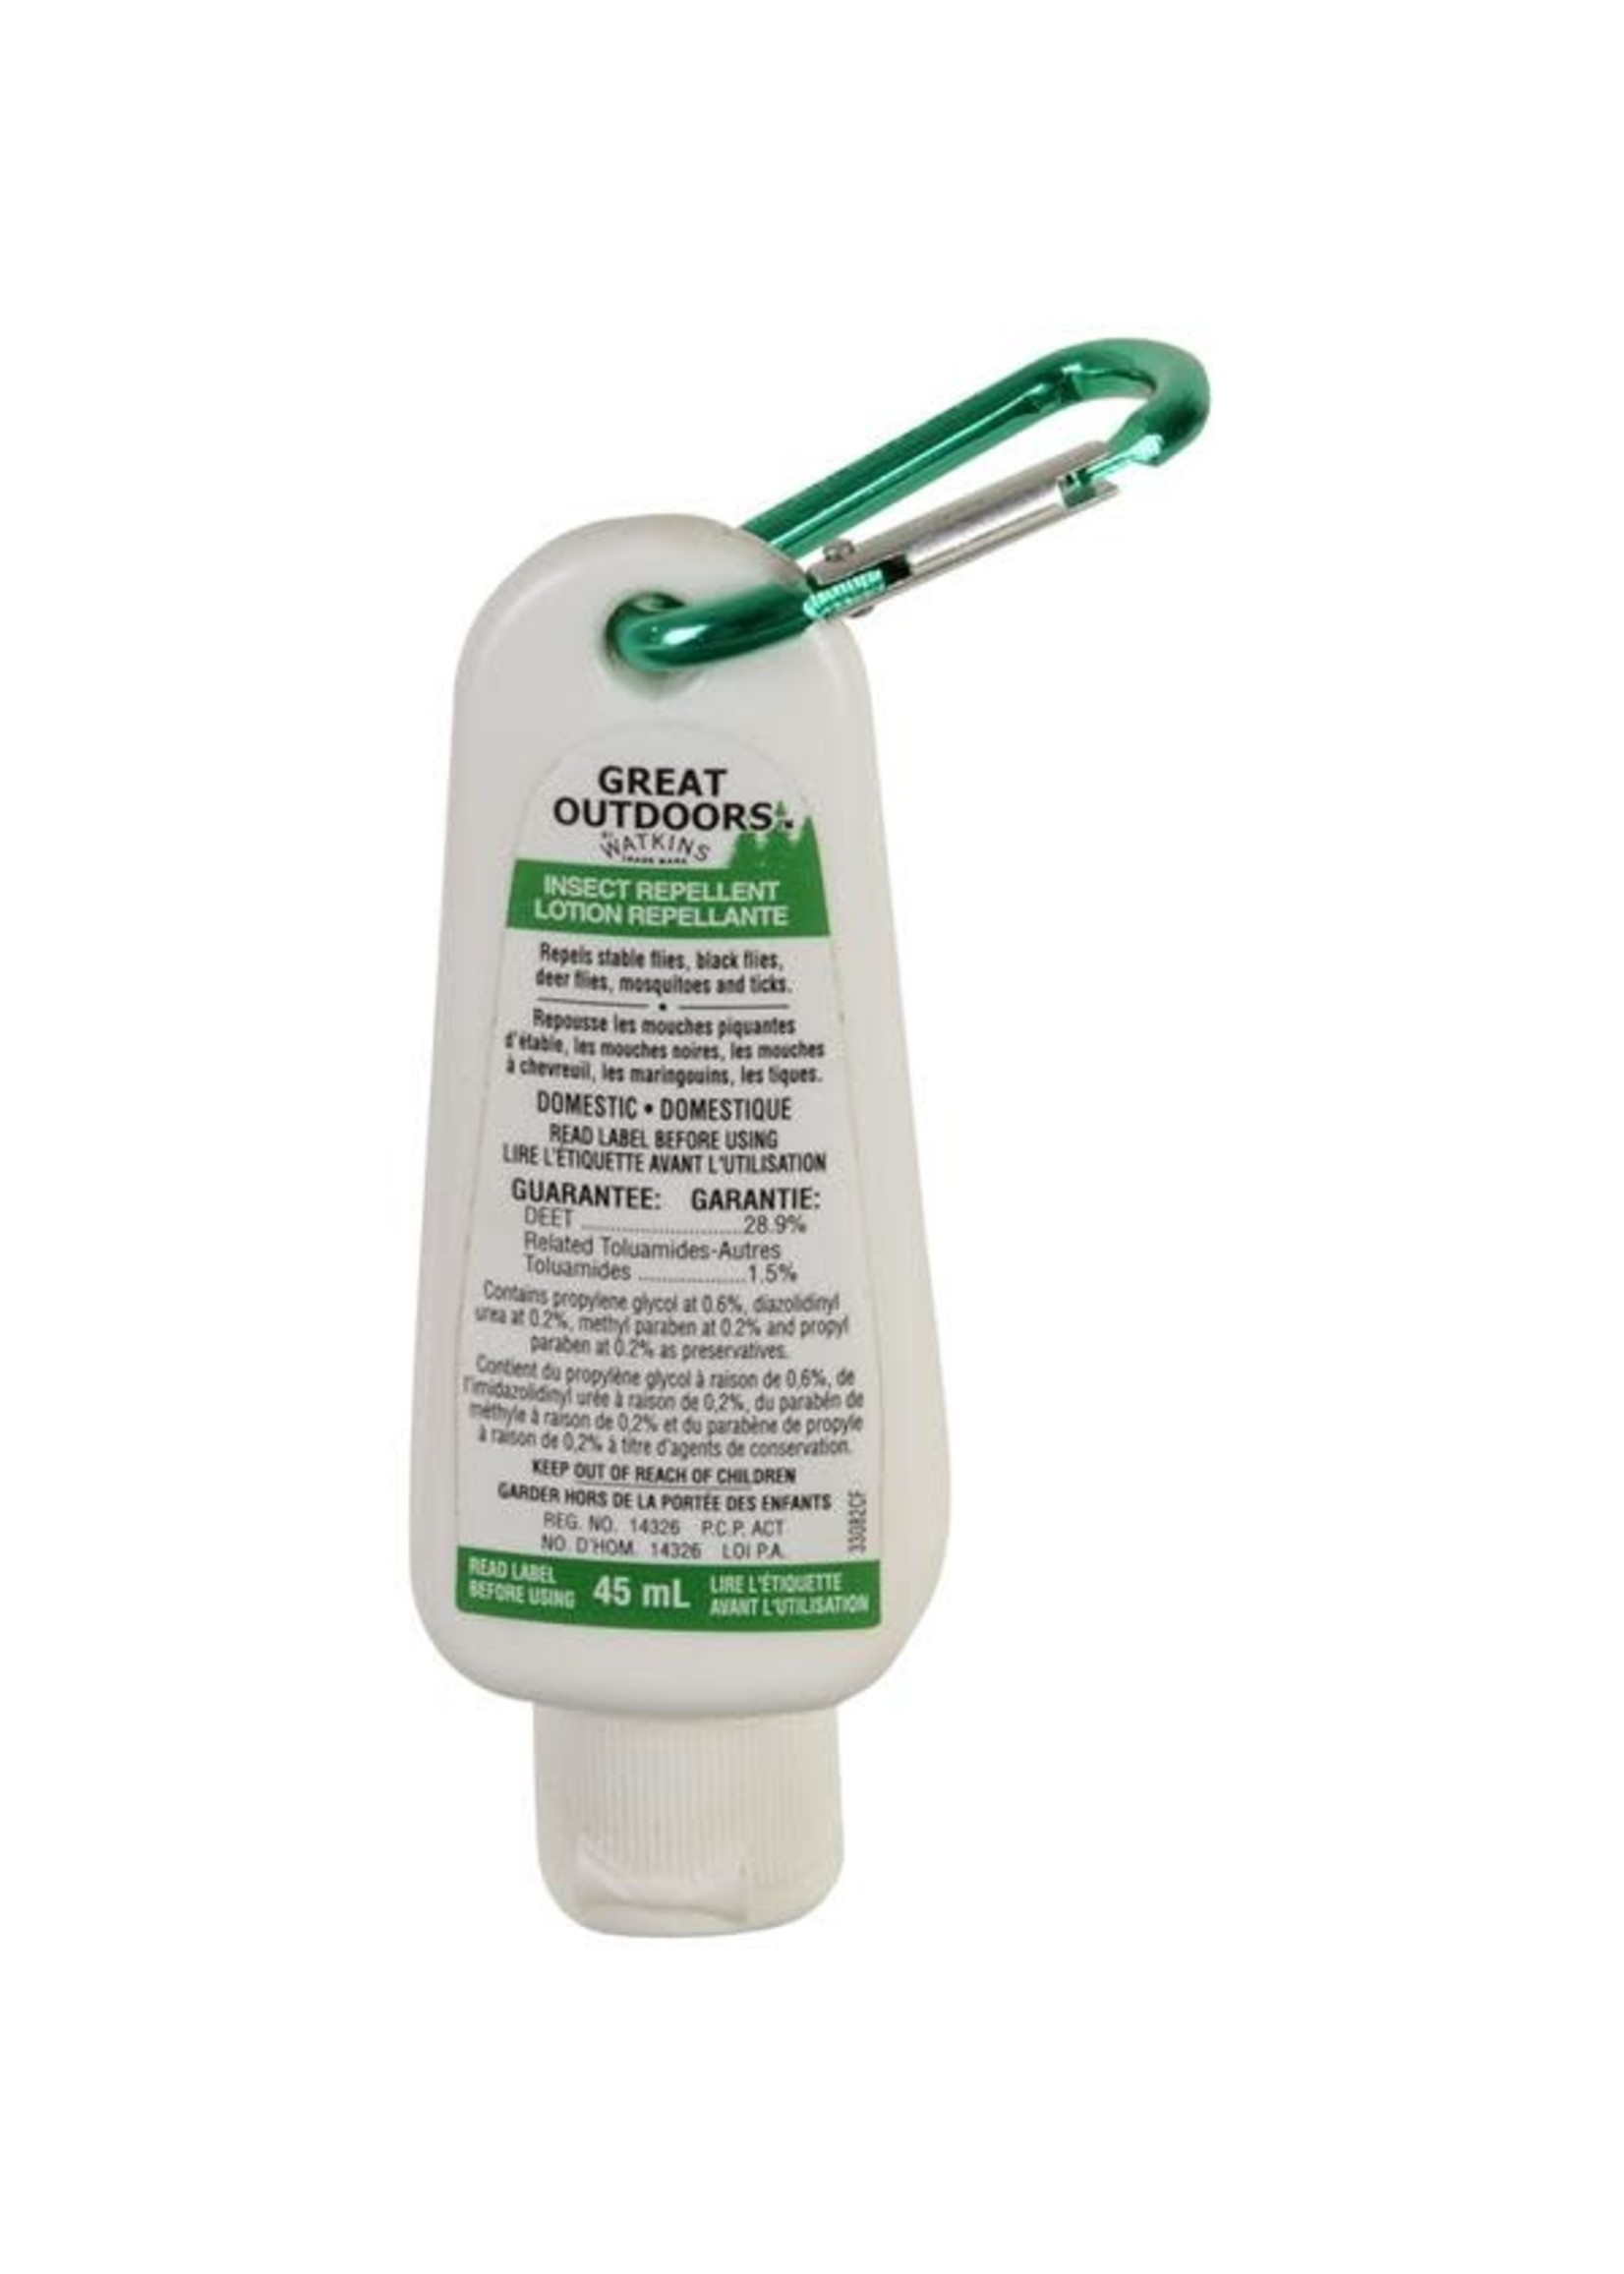 Great Outdoors insect repellent lotion